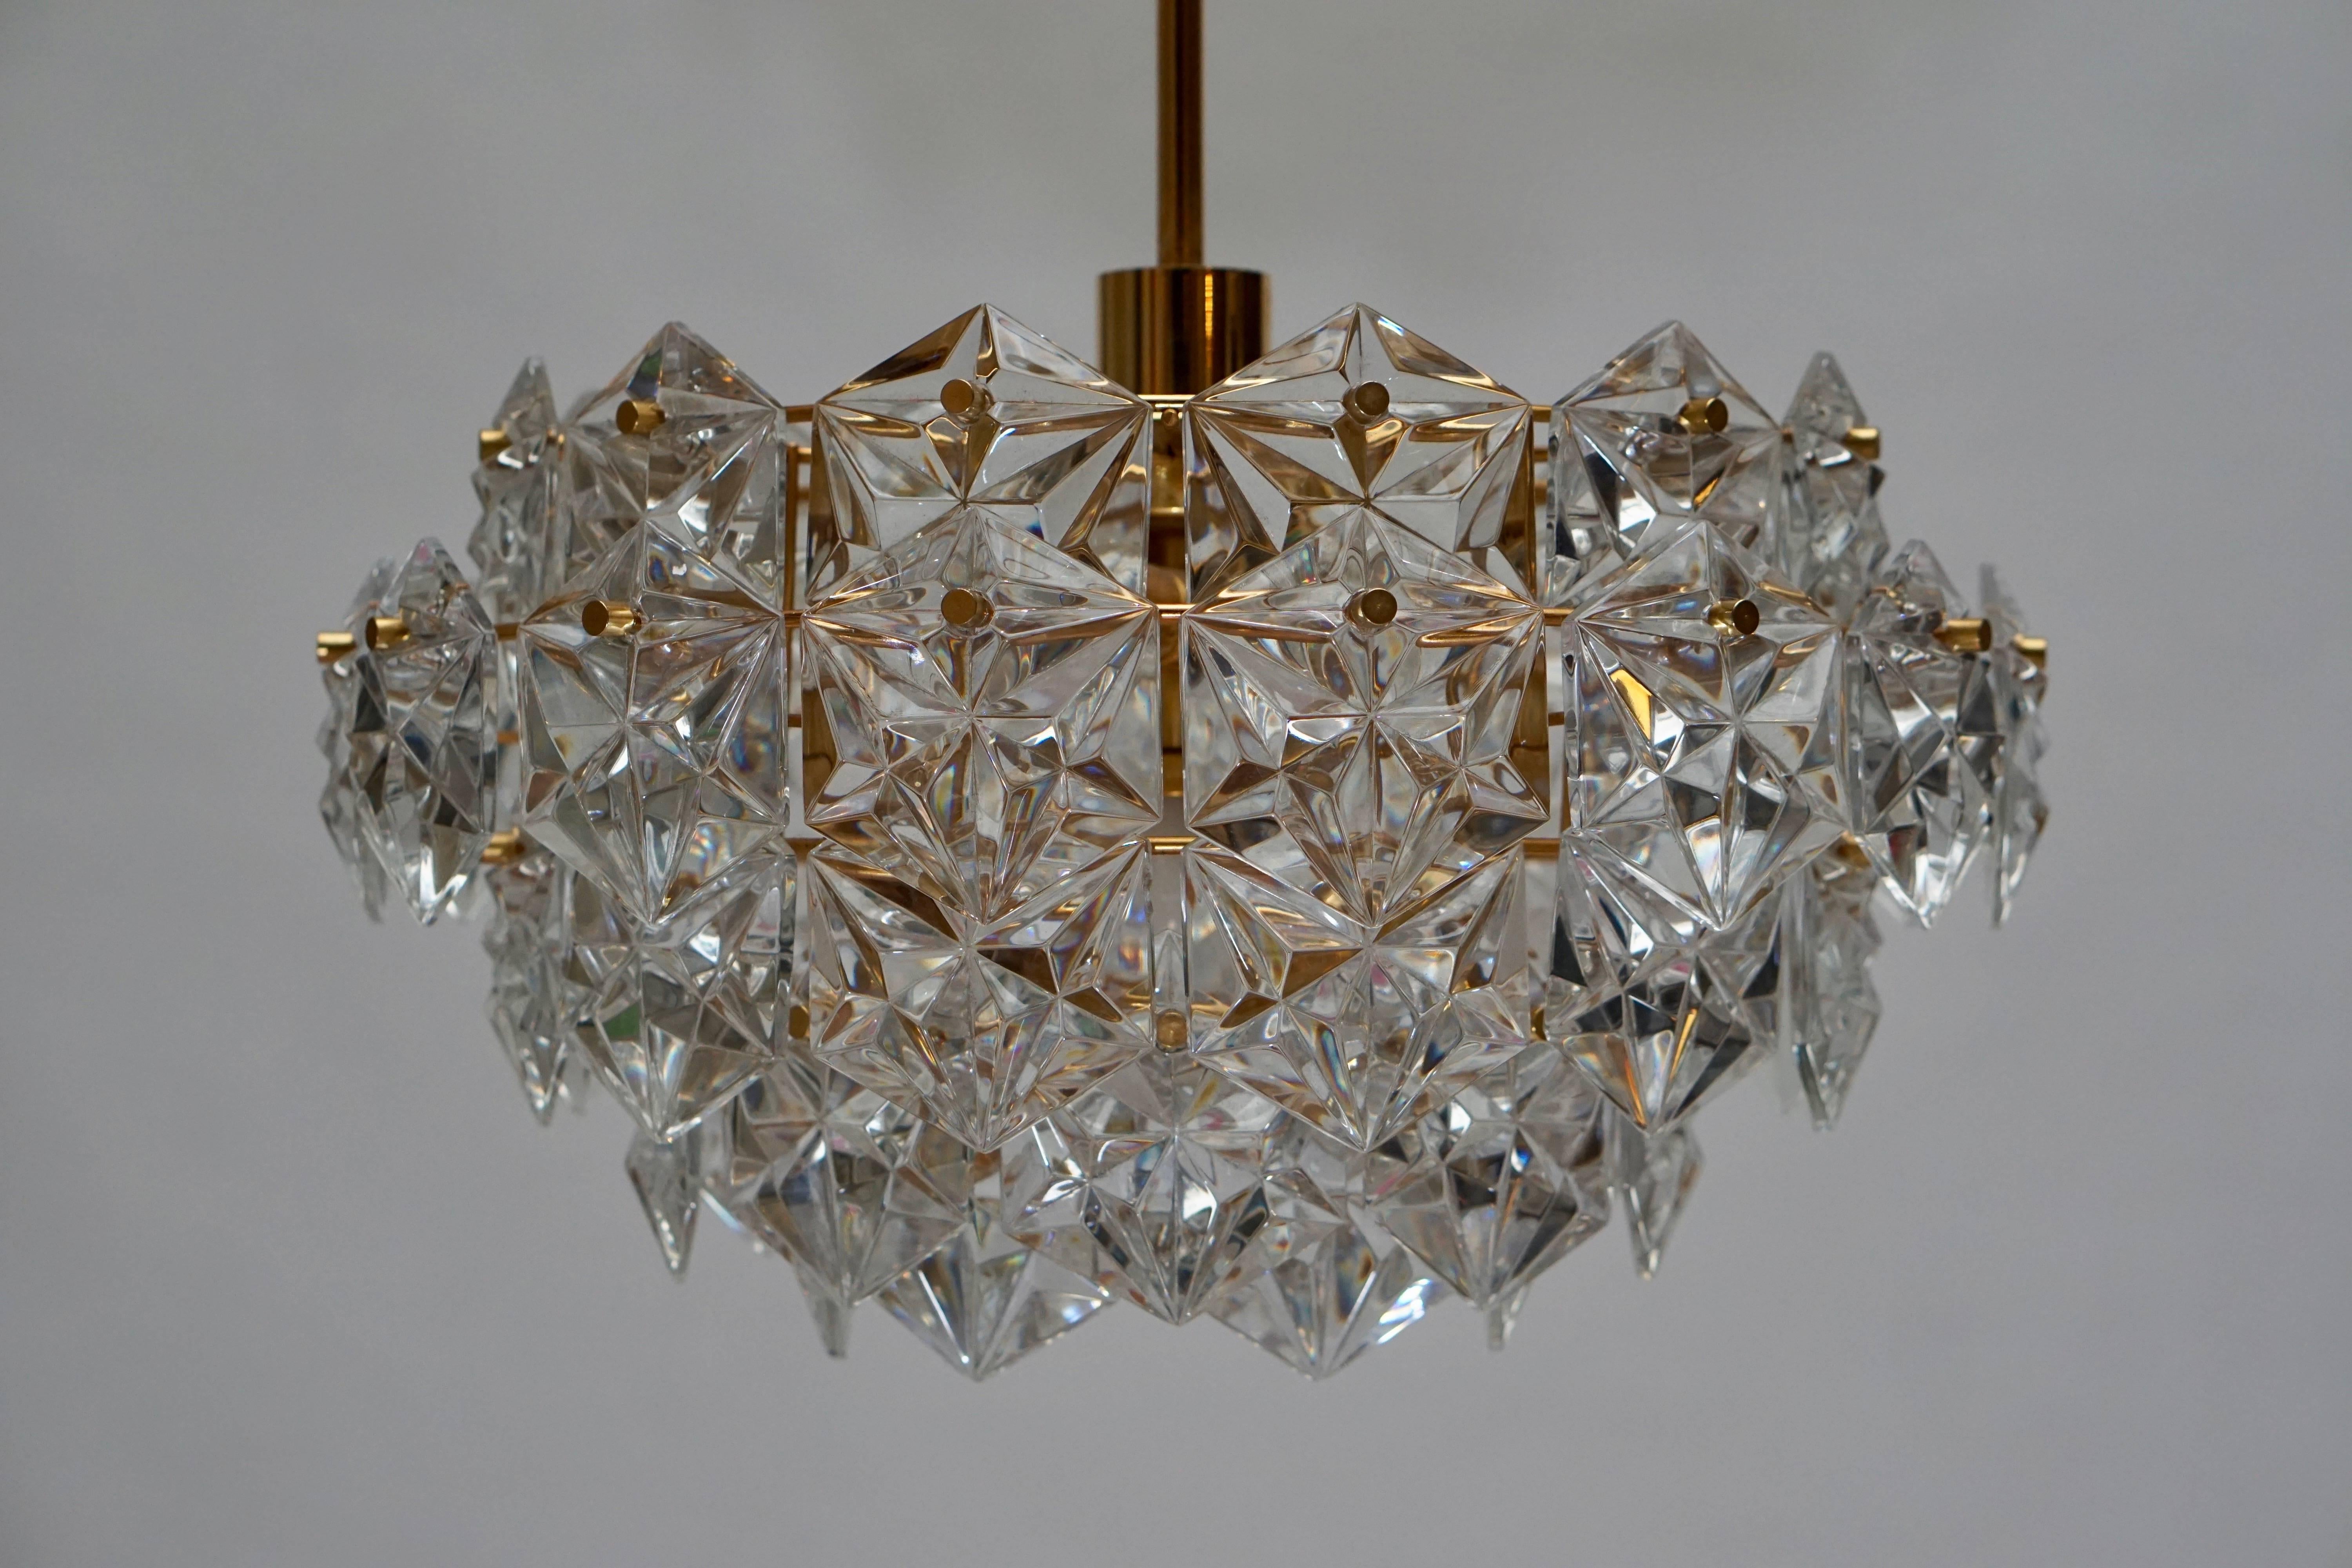 20th Century Mid-Century Modern Chandelier, Gold-Plated with Molded-Crystals, Kinkeldey For Sale